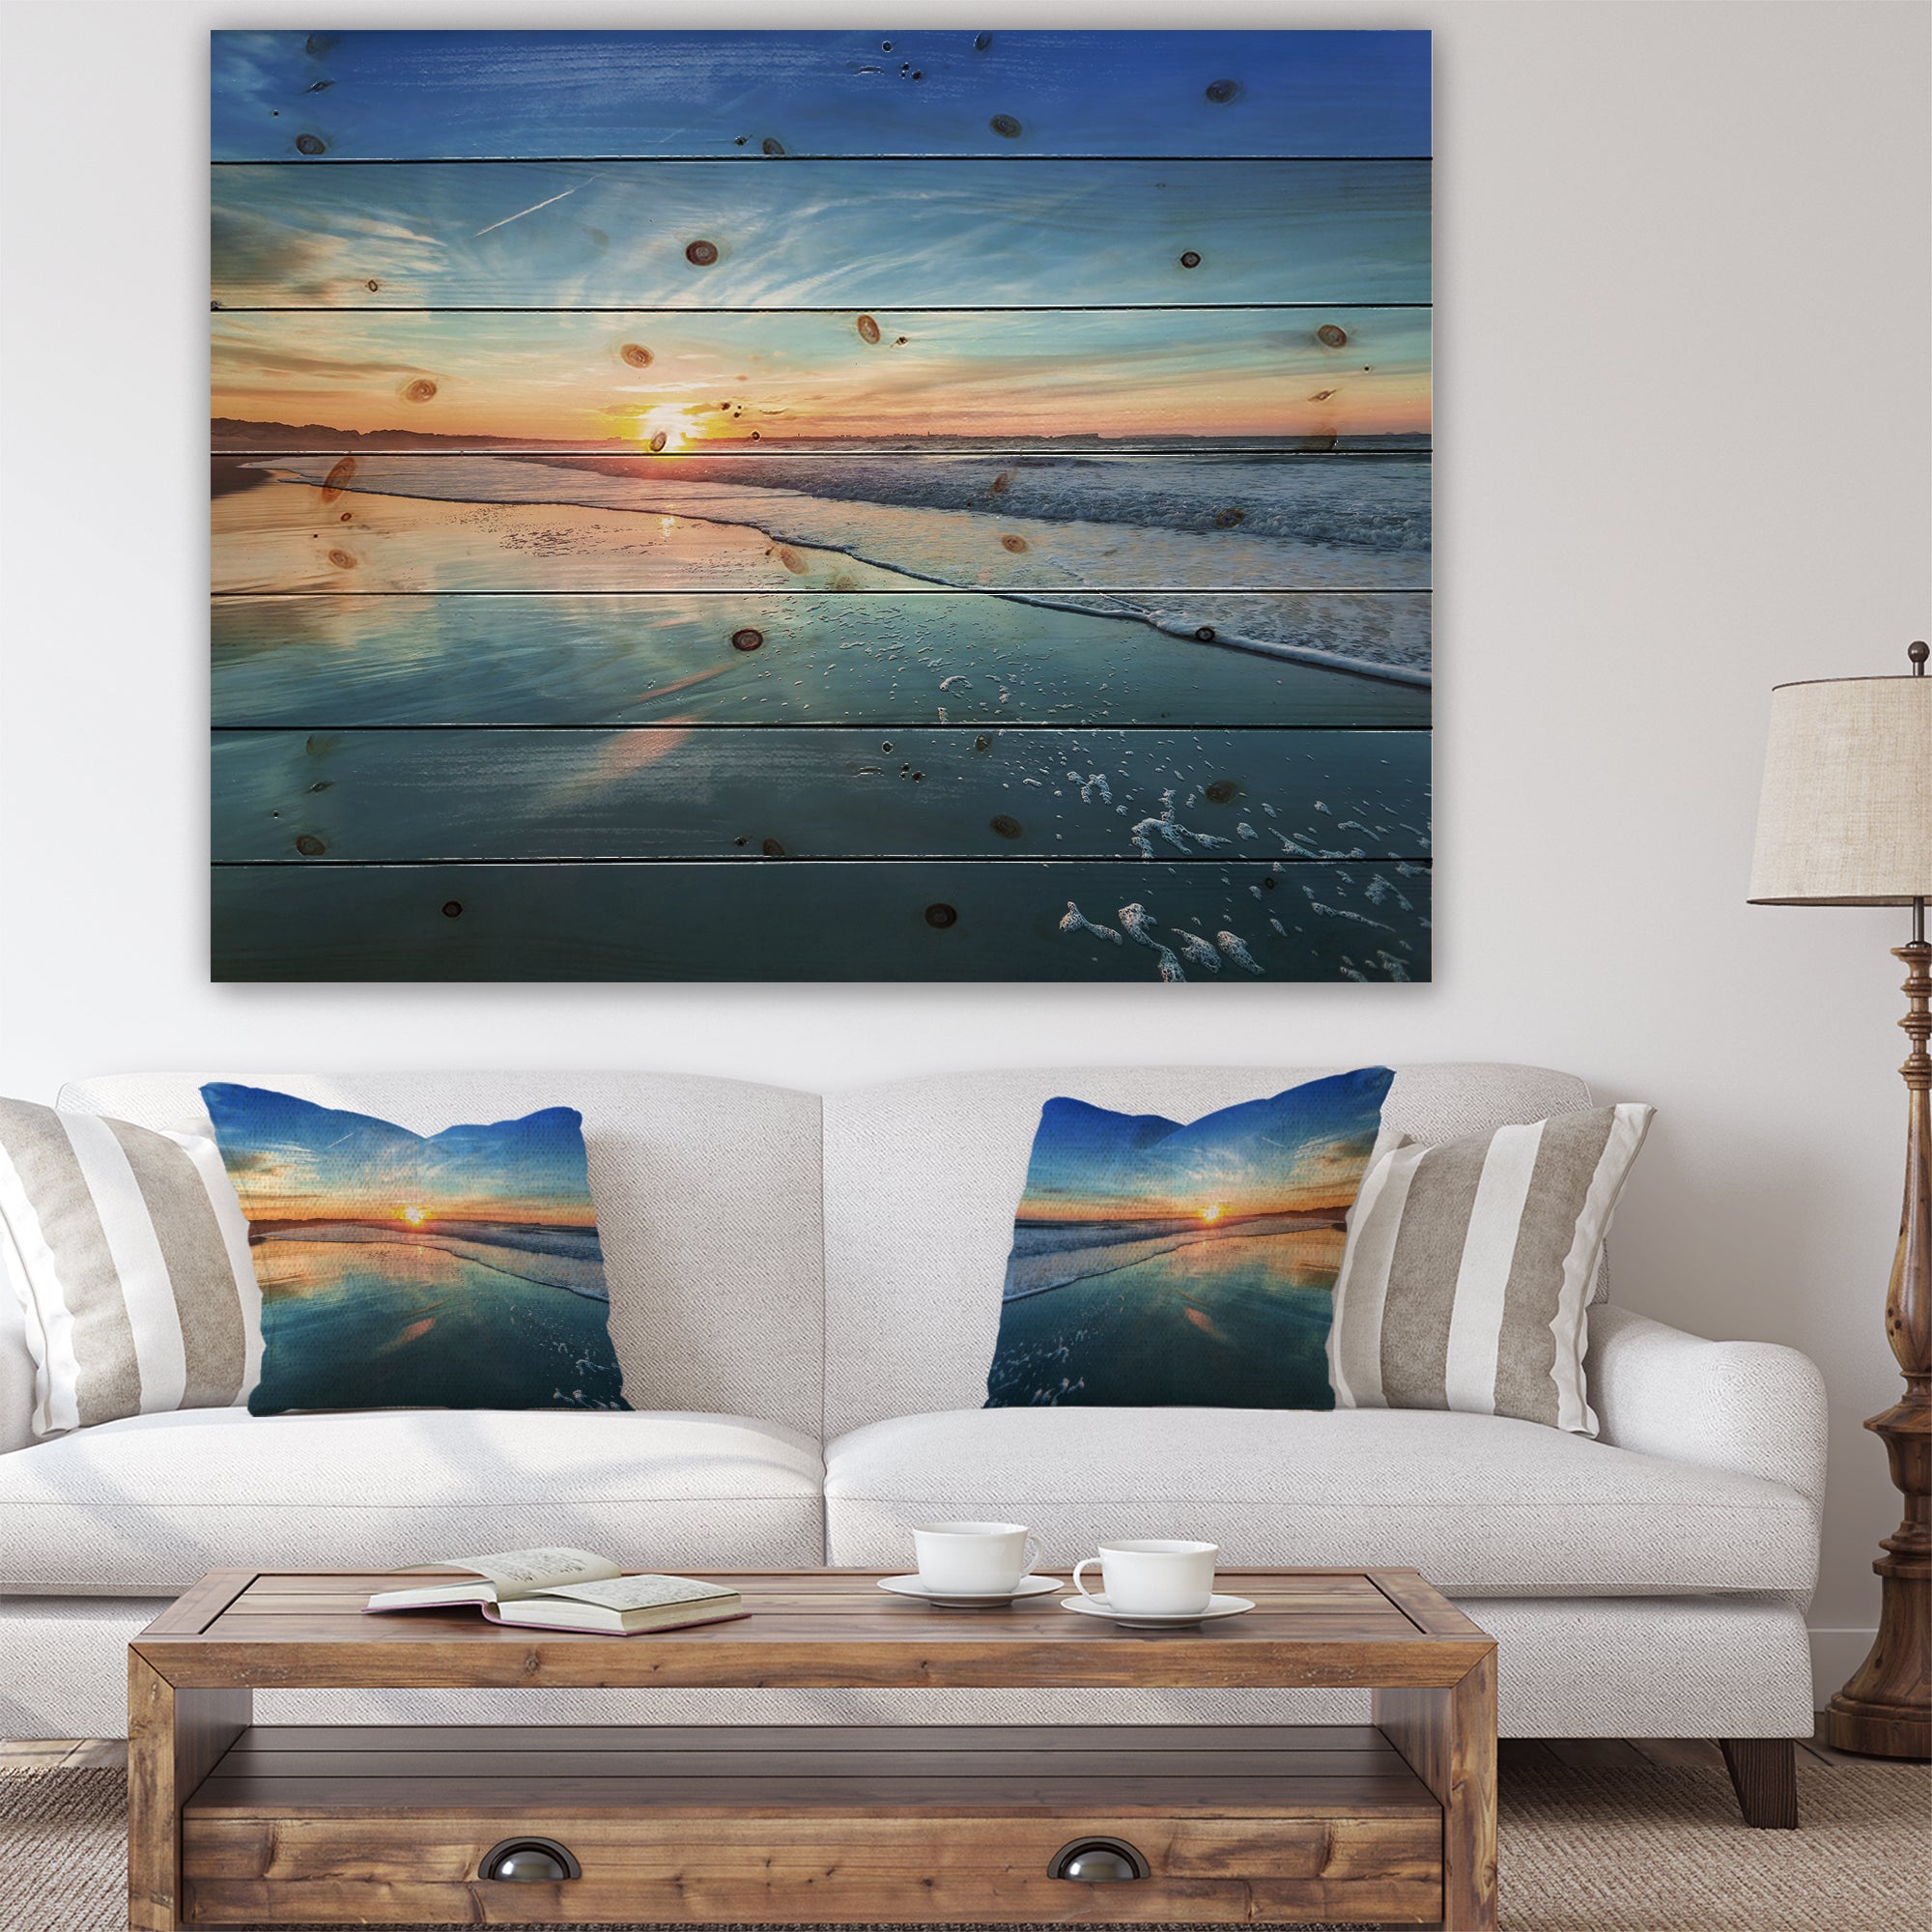 Blue Seashore with Distant Sunset - Seascape Print on Natural Pine Wood - 20x15